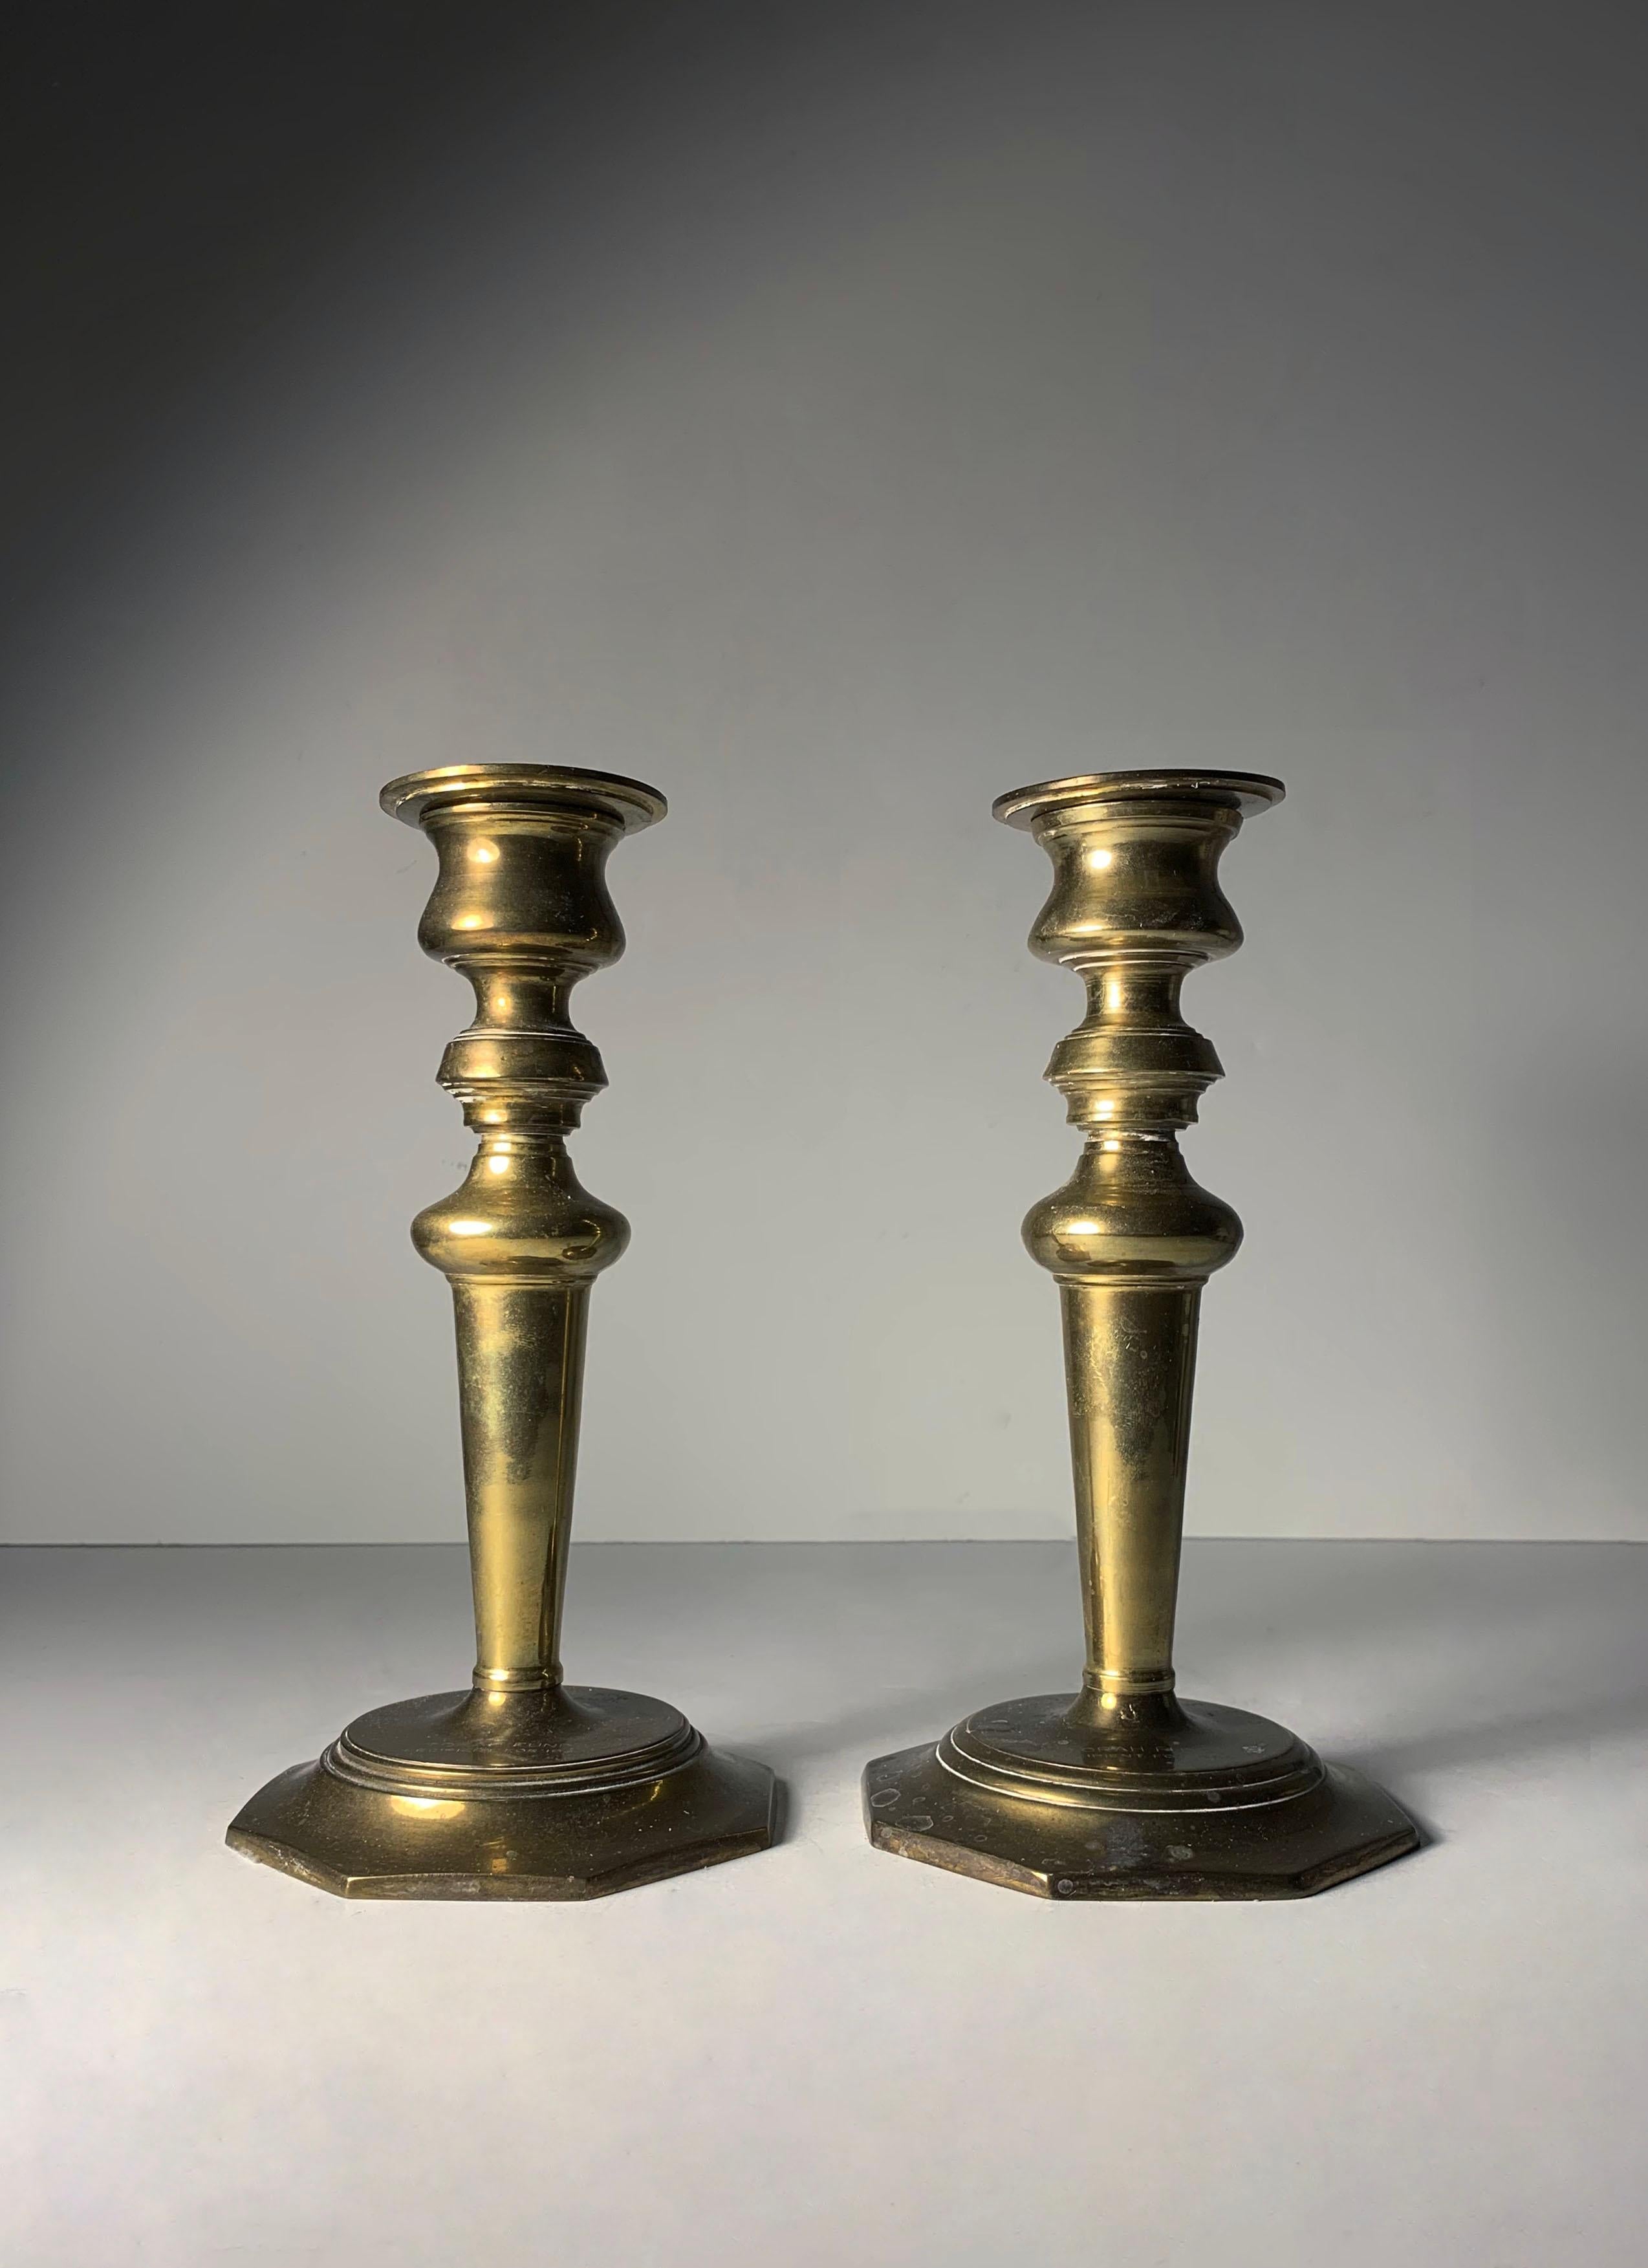 Pair of Brass Candlesticks awarded to Rose Friedman (Milton Friedman). These were acquired many years ago at a local resale store in Chicago. Cannot say for absolute certain, but they appear to be awards given to the important Economist, Rose